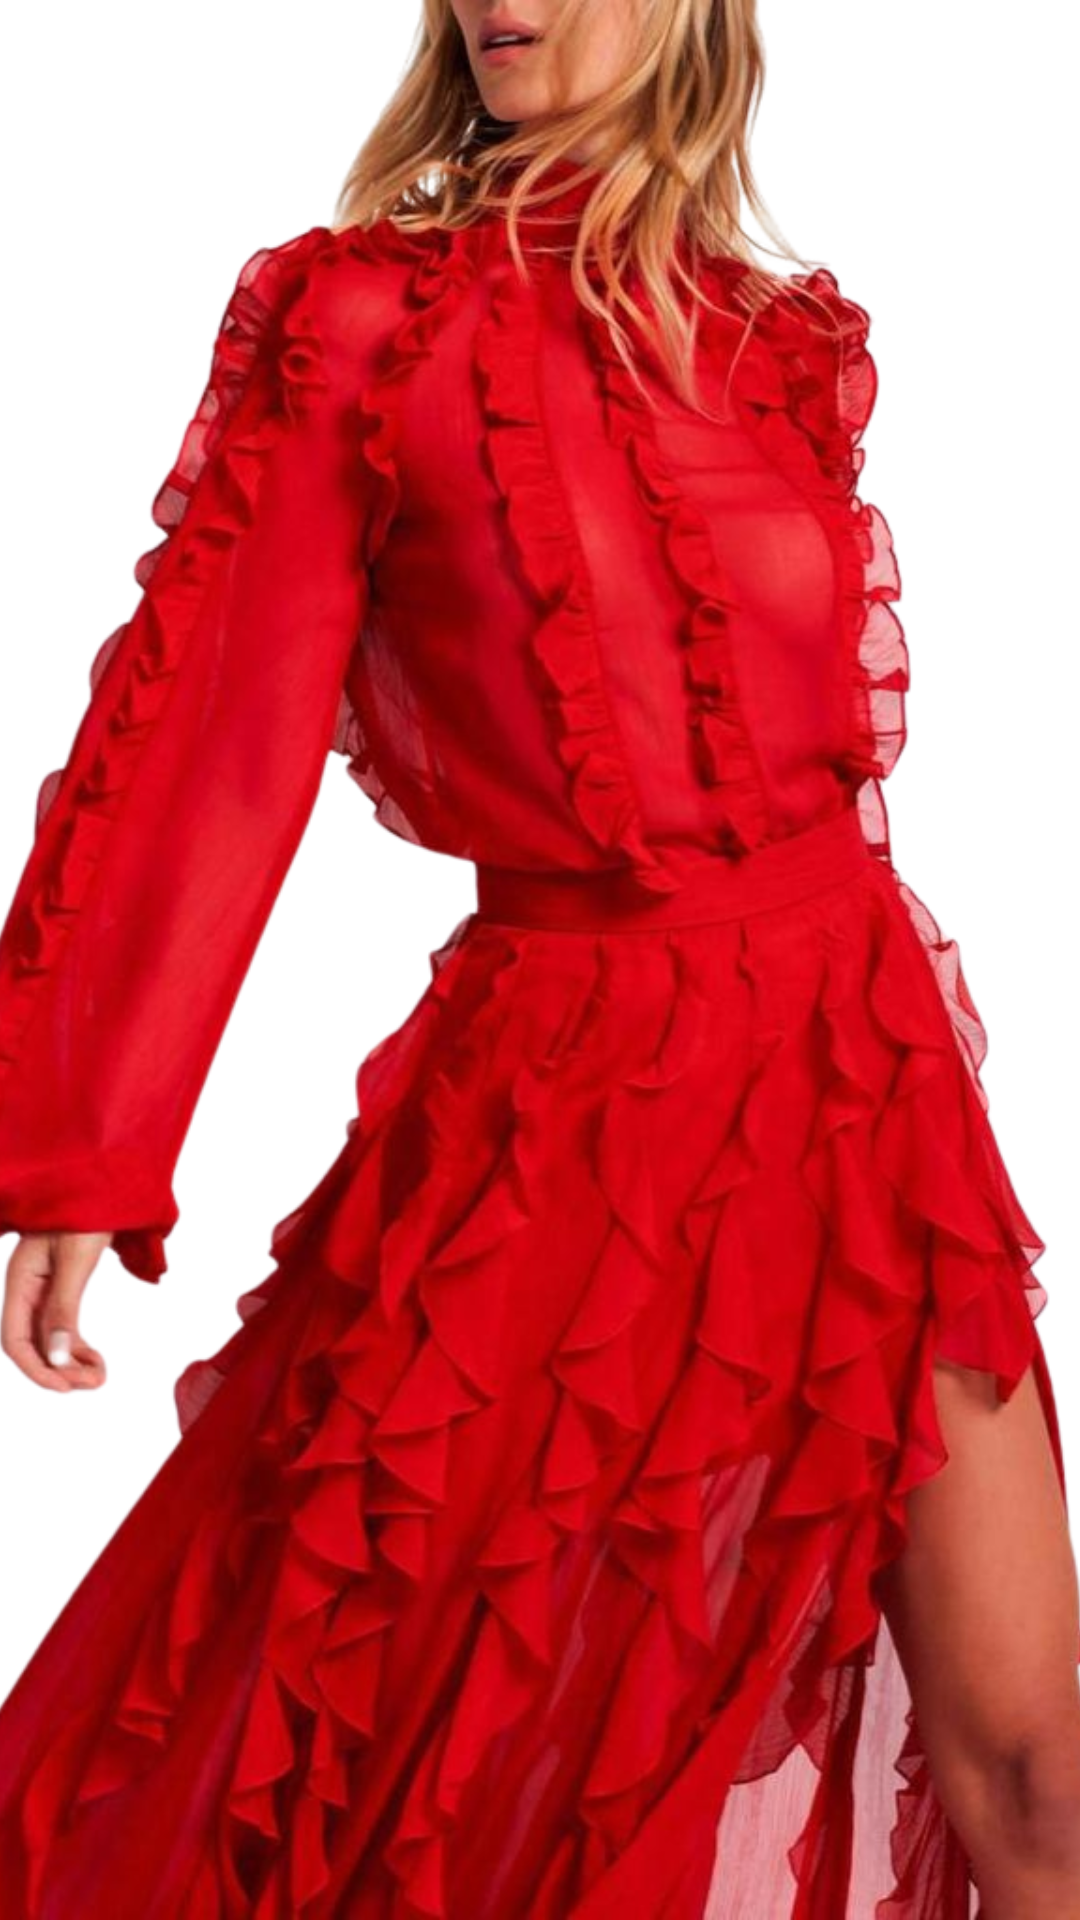 Red Skirt With Ruffles